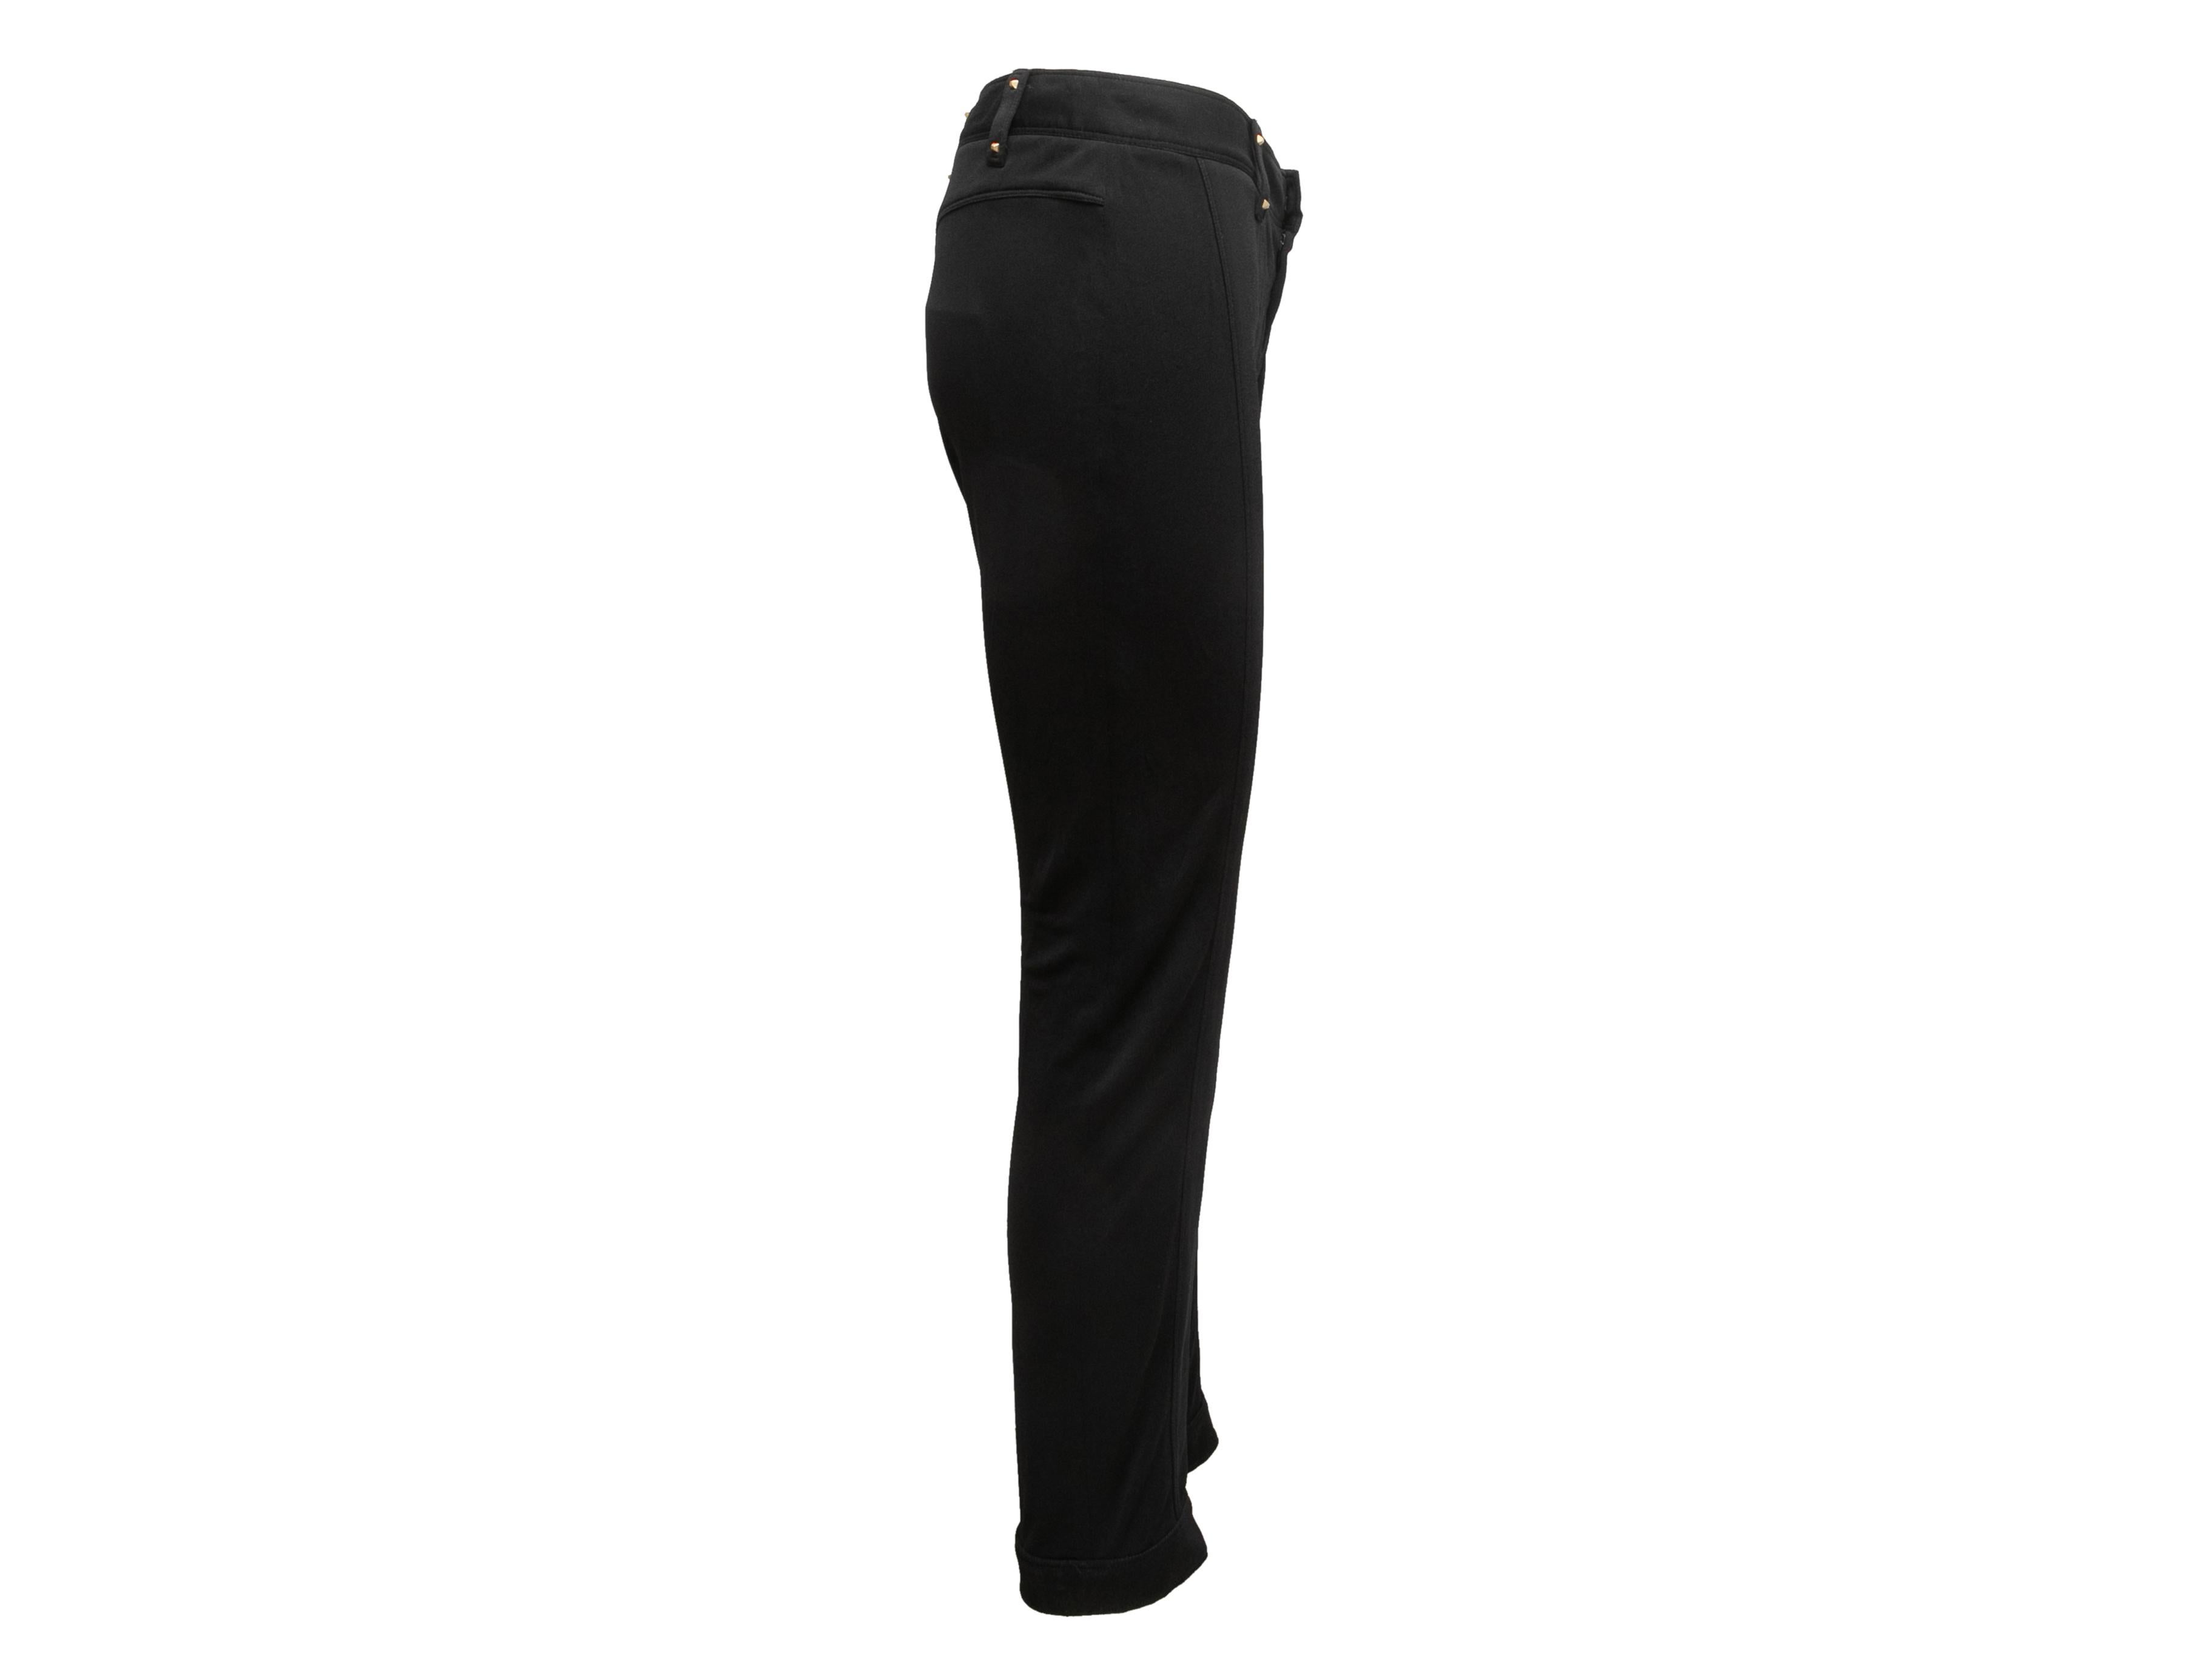 Black skinny-leg pants by Gucci. From the Tom Ford era. Dual back pockets. Zip closure at front. 32